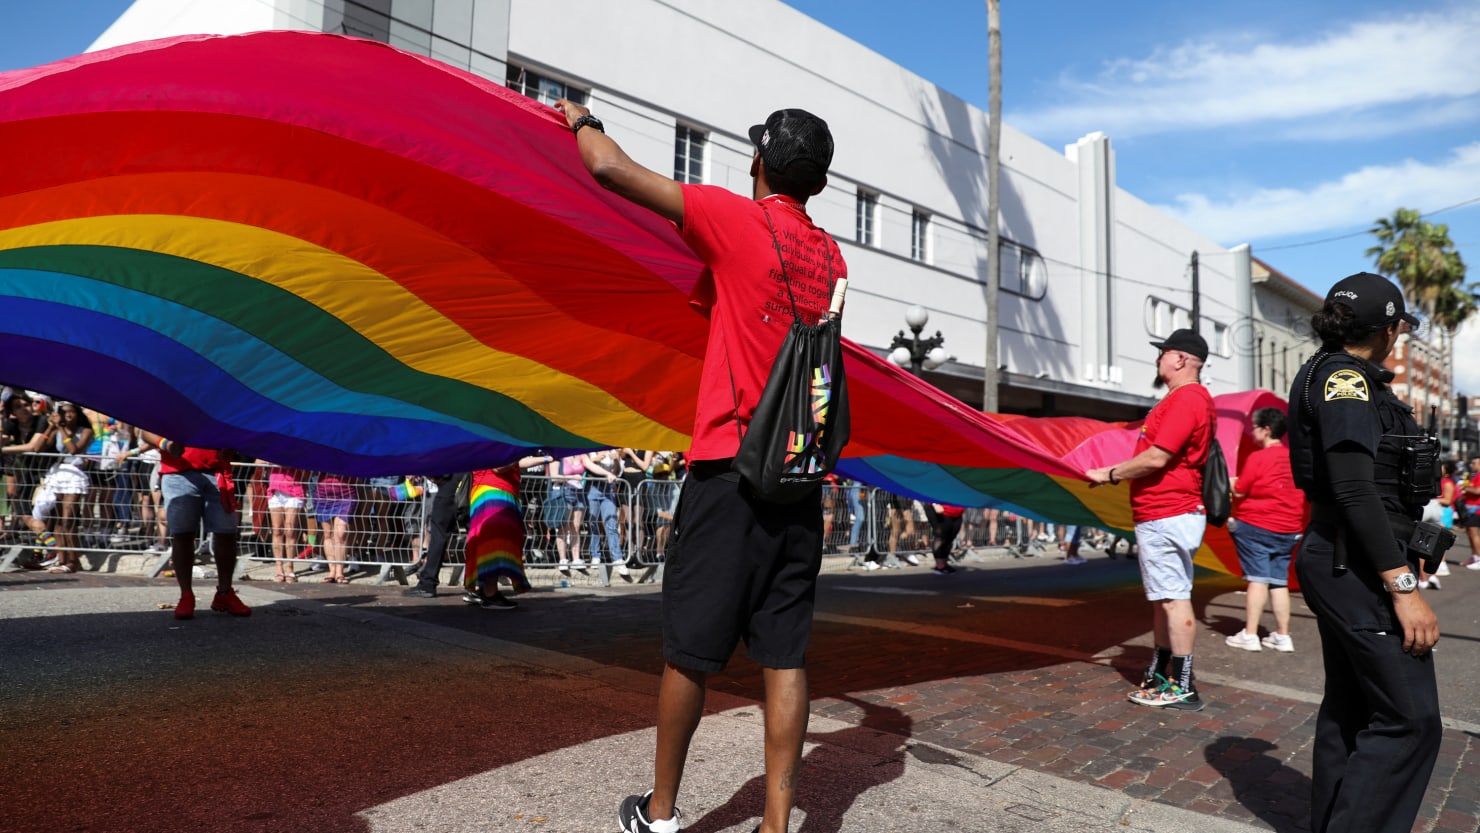 Largest U.S. LGBTQ+ Rights Group Advises Against Travel to Florida